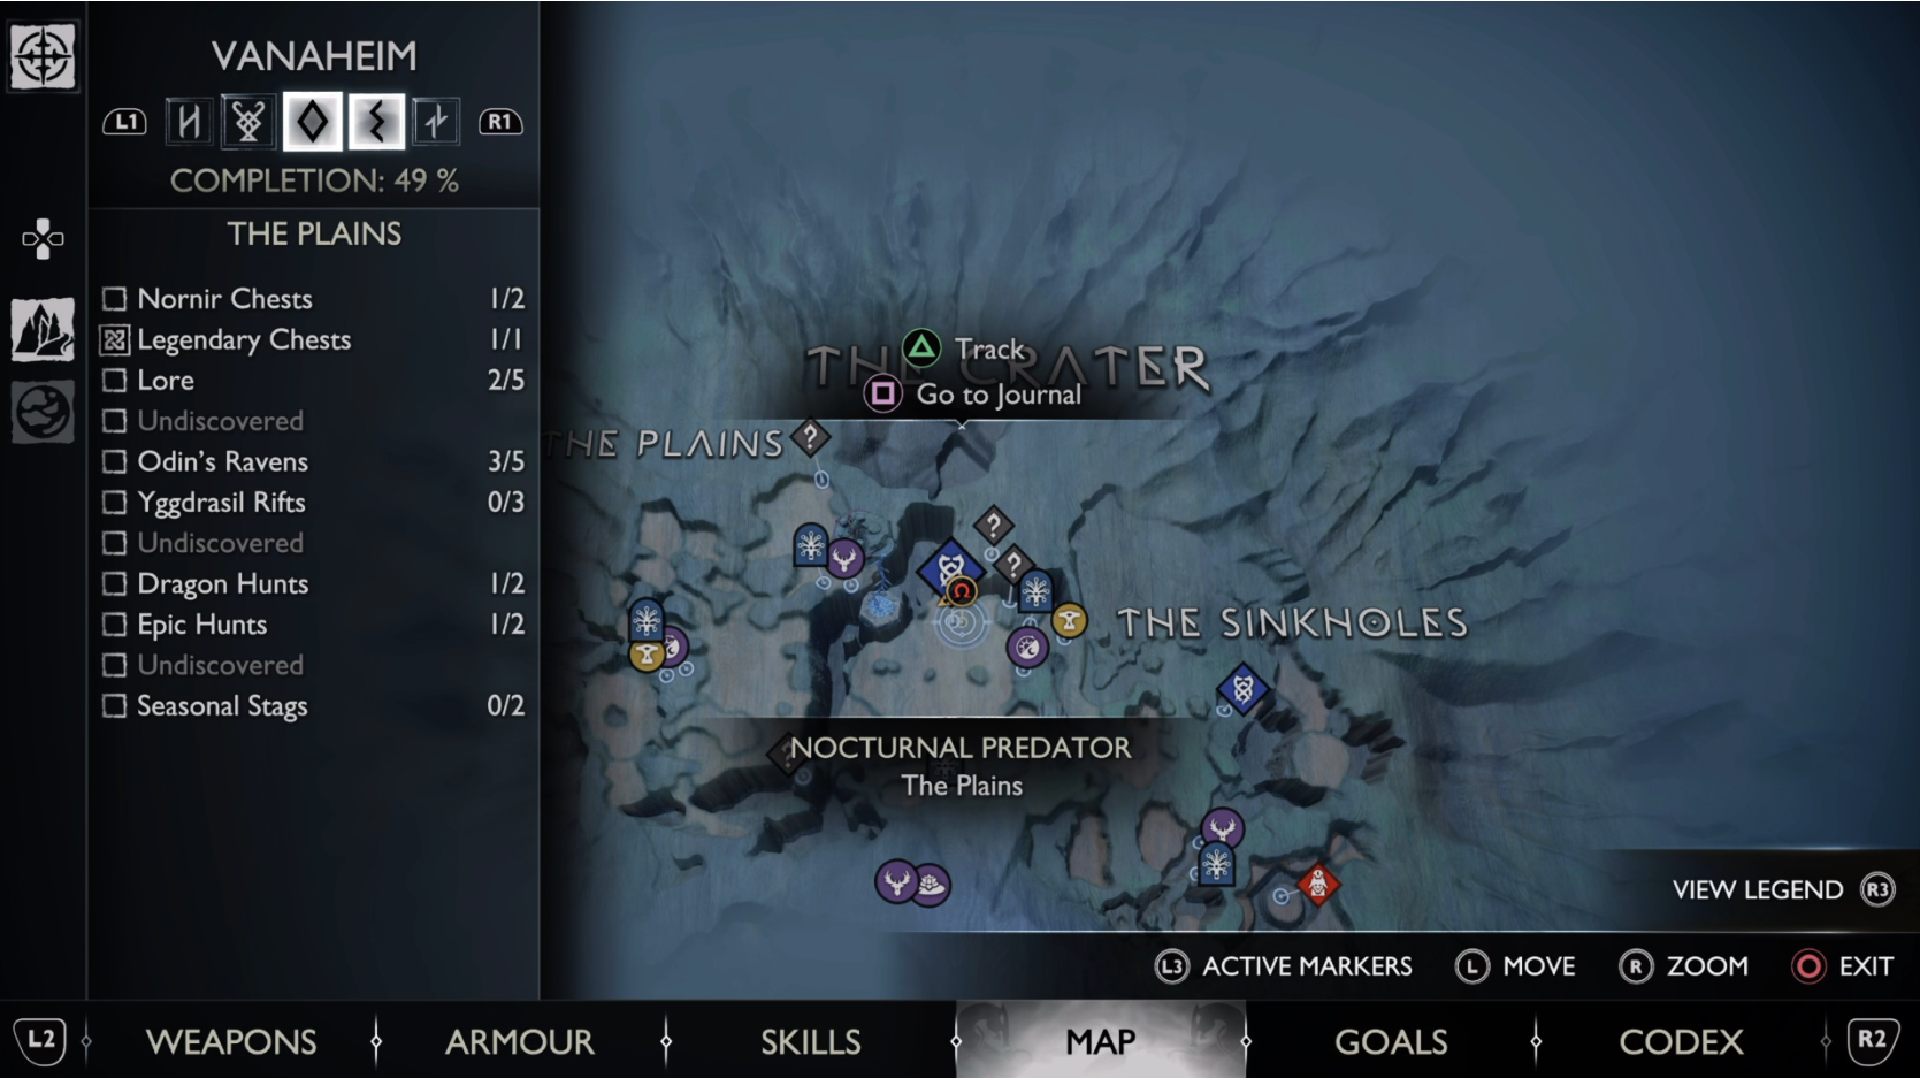 God of War Ragnarok Gale Flame Locations: The map of The Crater can be seen